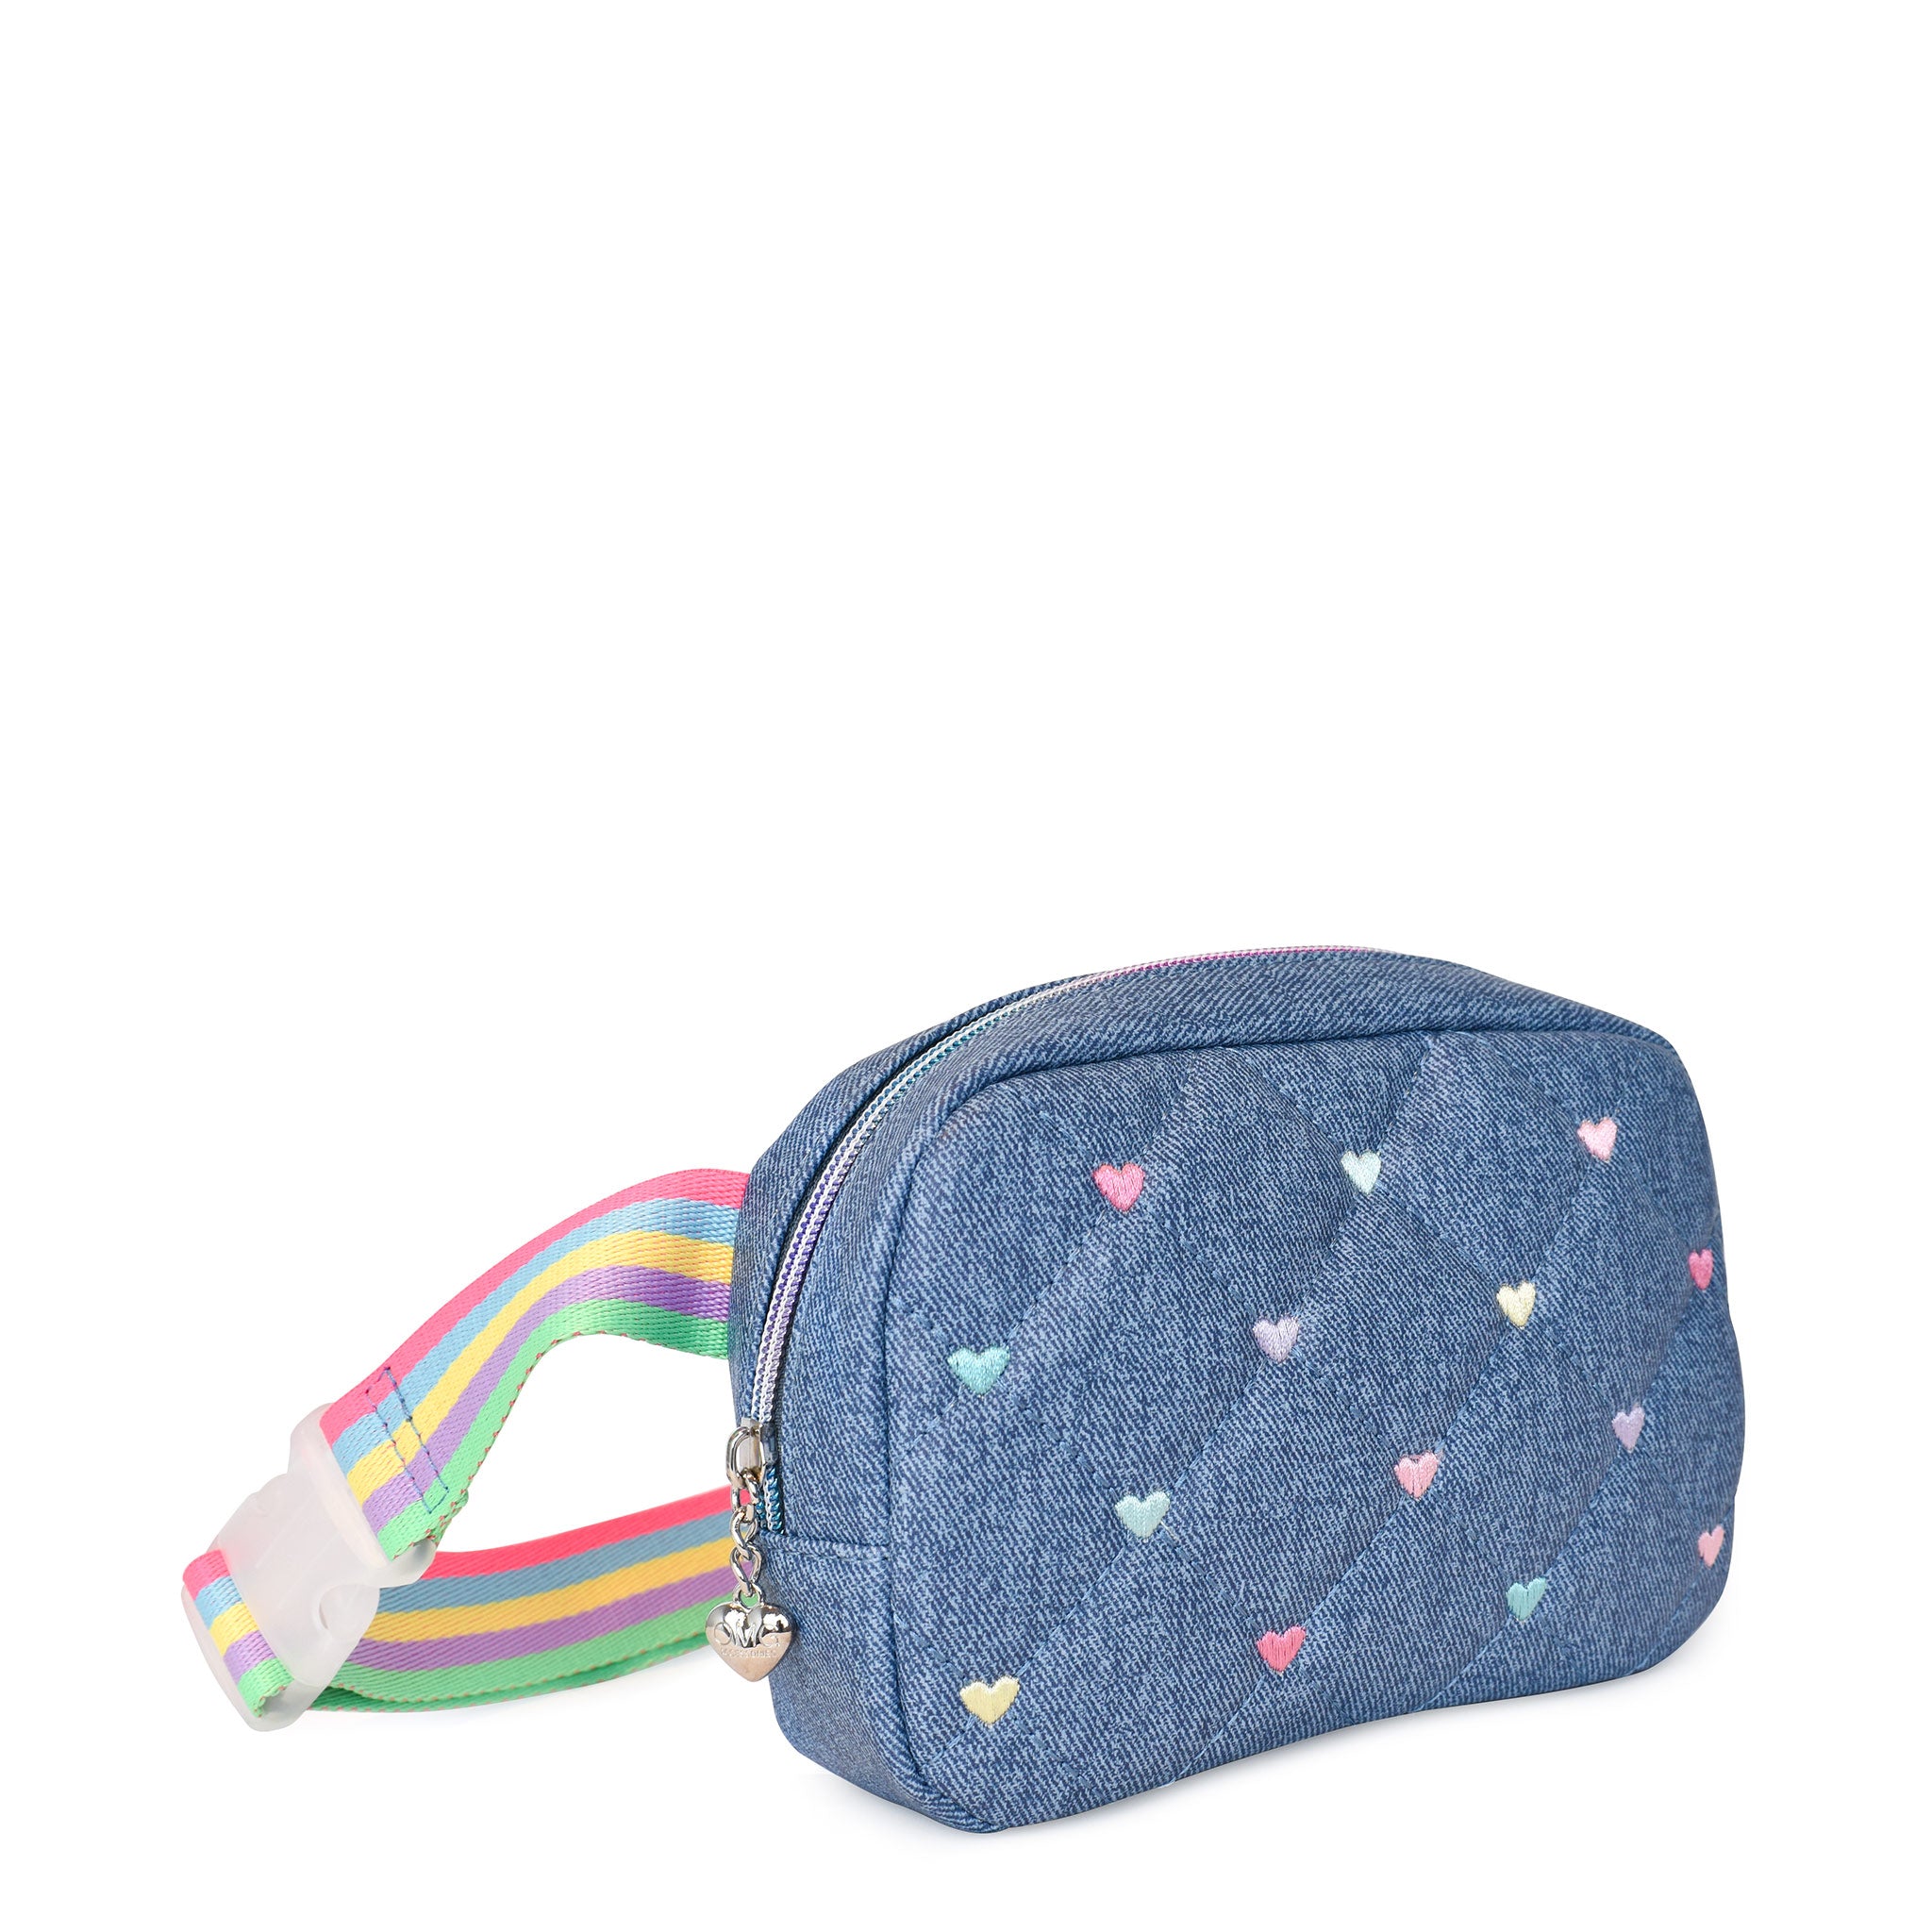 Side view of a denim quilted fanny pack with embroidered hearts